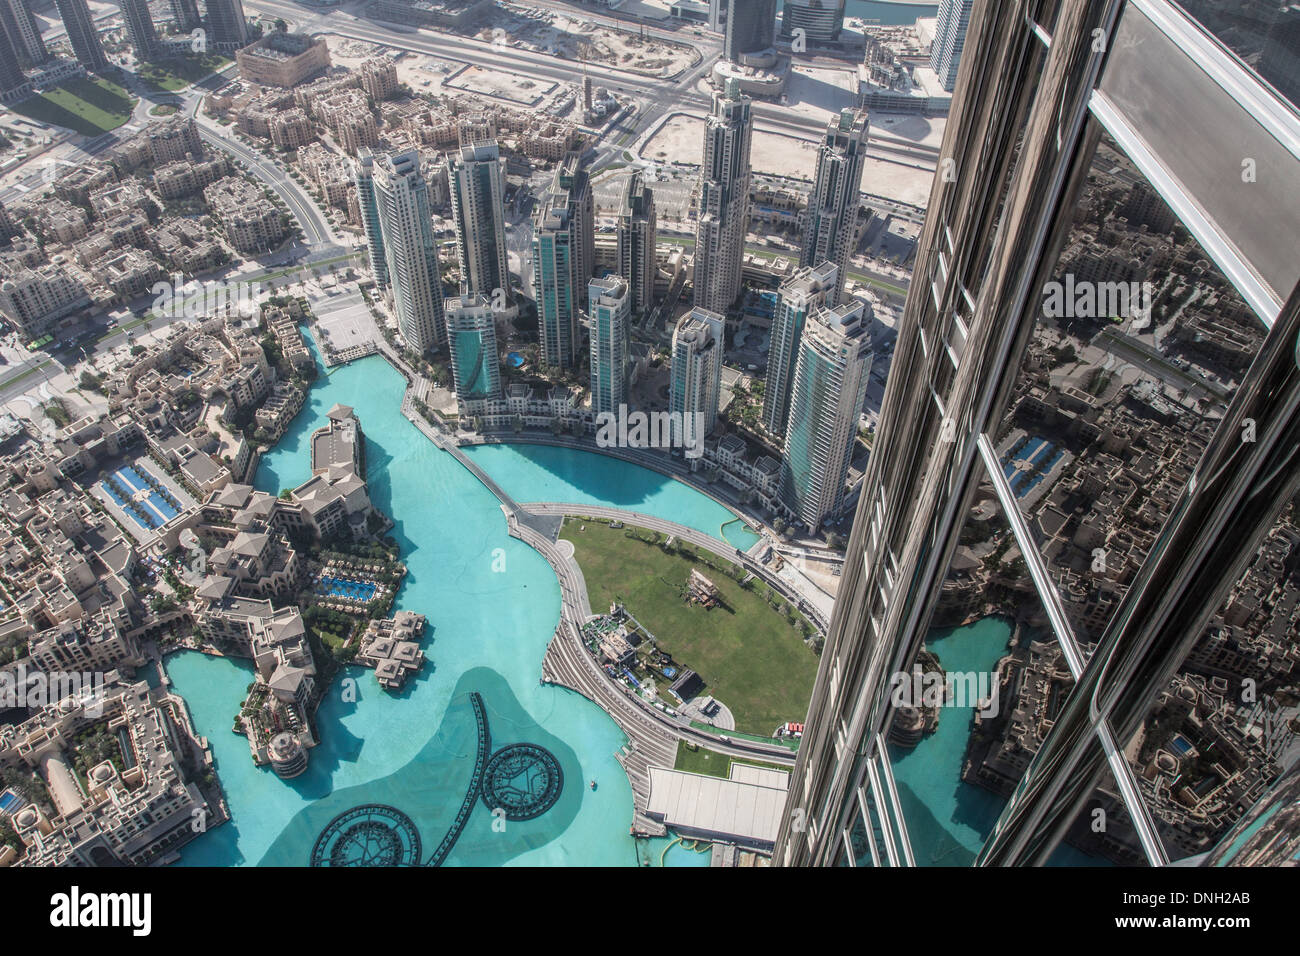 BIRD'S EYE VIEW OF DOWNTOWN DUBAI FROM THE OBSERVATORY IN THE BURJ KHALIFA TOWER, ONCE CALLED BURJ DUBAI, VIEW FROM THE THE HIGHEST TOWER IN THE WORLD (828 METRES), DUBAI, UNITED ARAB EMIRATES, MIDDLE EAST Stock Photo